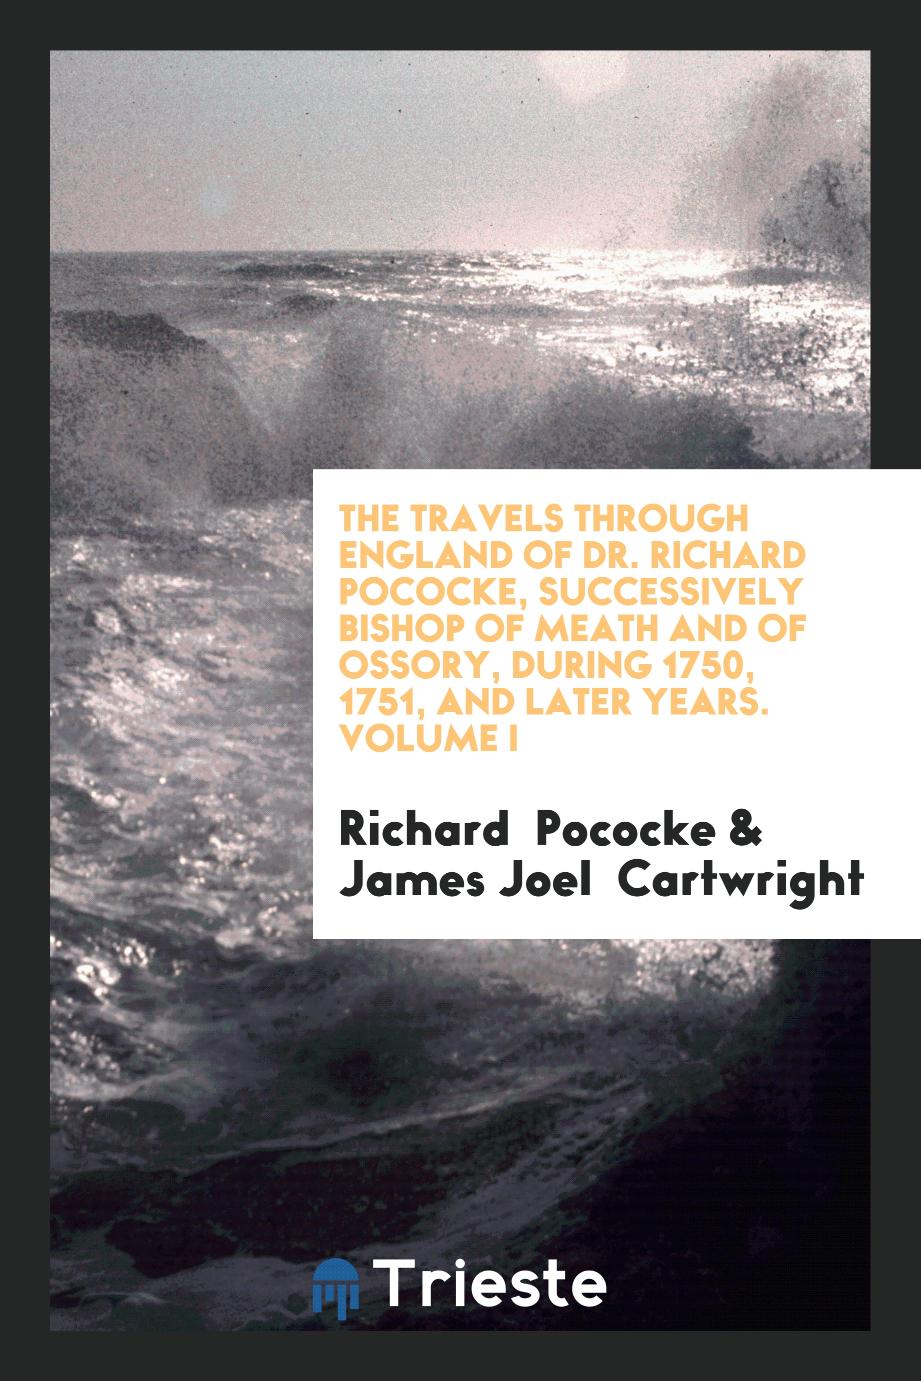 The Travels Through England of Dr. Richard Pococke, Successively Bishop of Meath and of Ossory, During 1750, 1751, and Later Years. Volume I